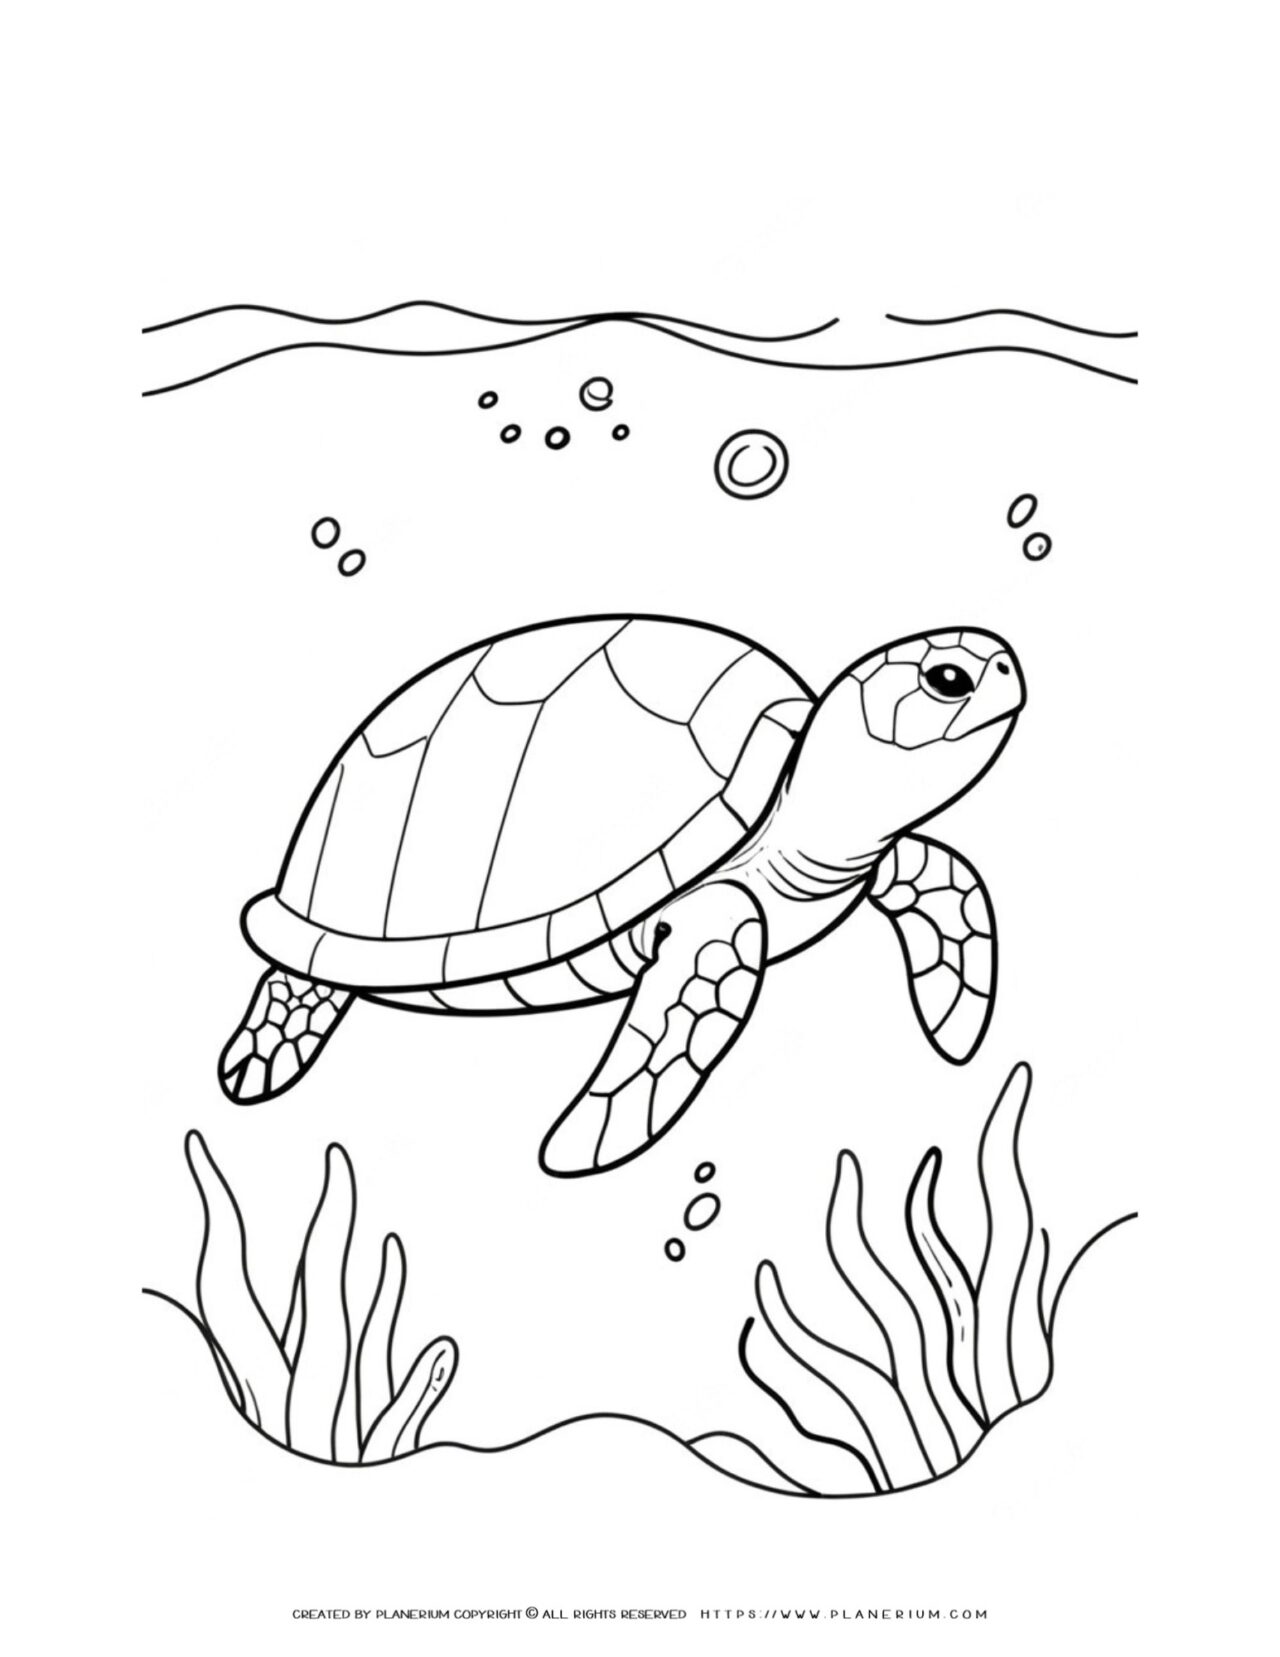 Coloring-page-featuring-underwater-turtle-with-seaweed